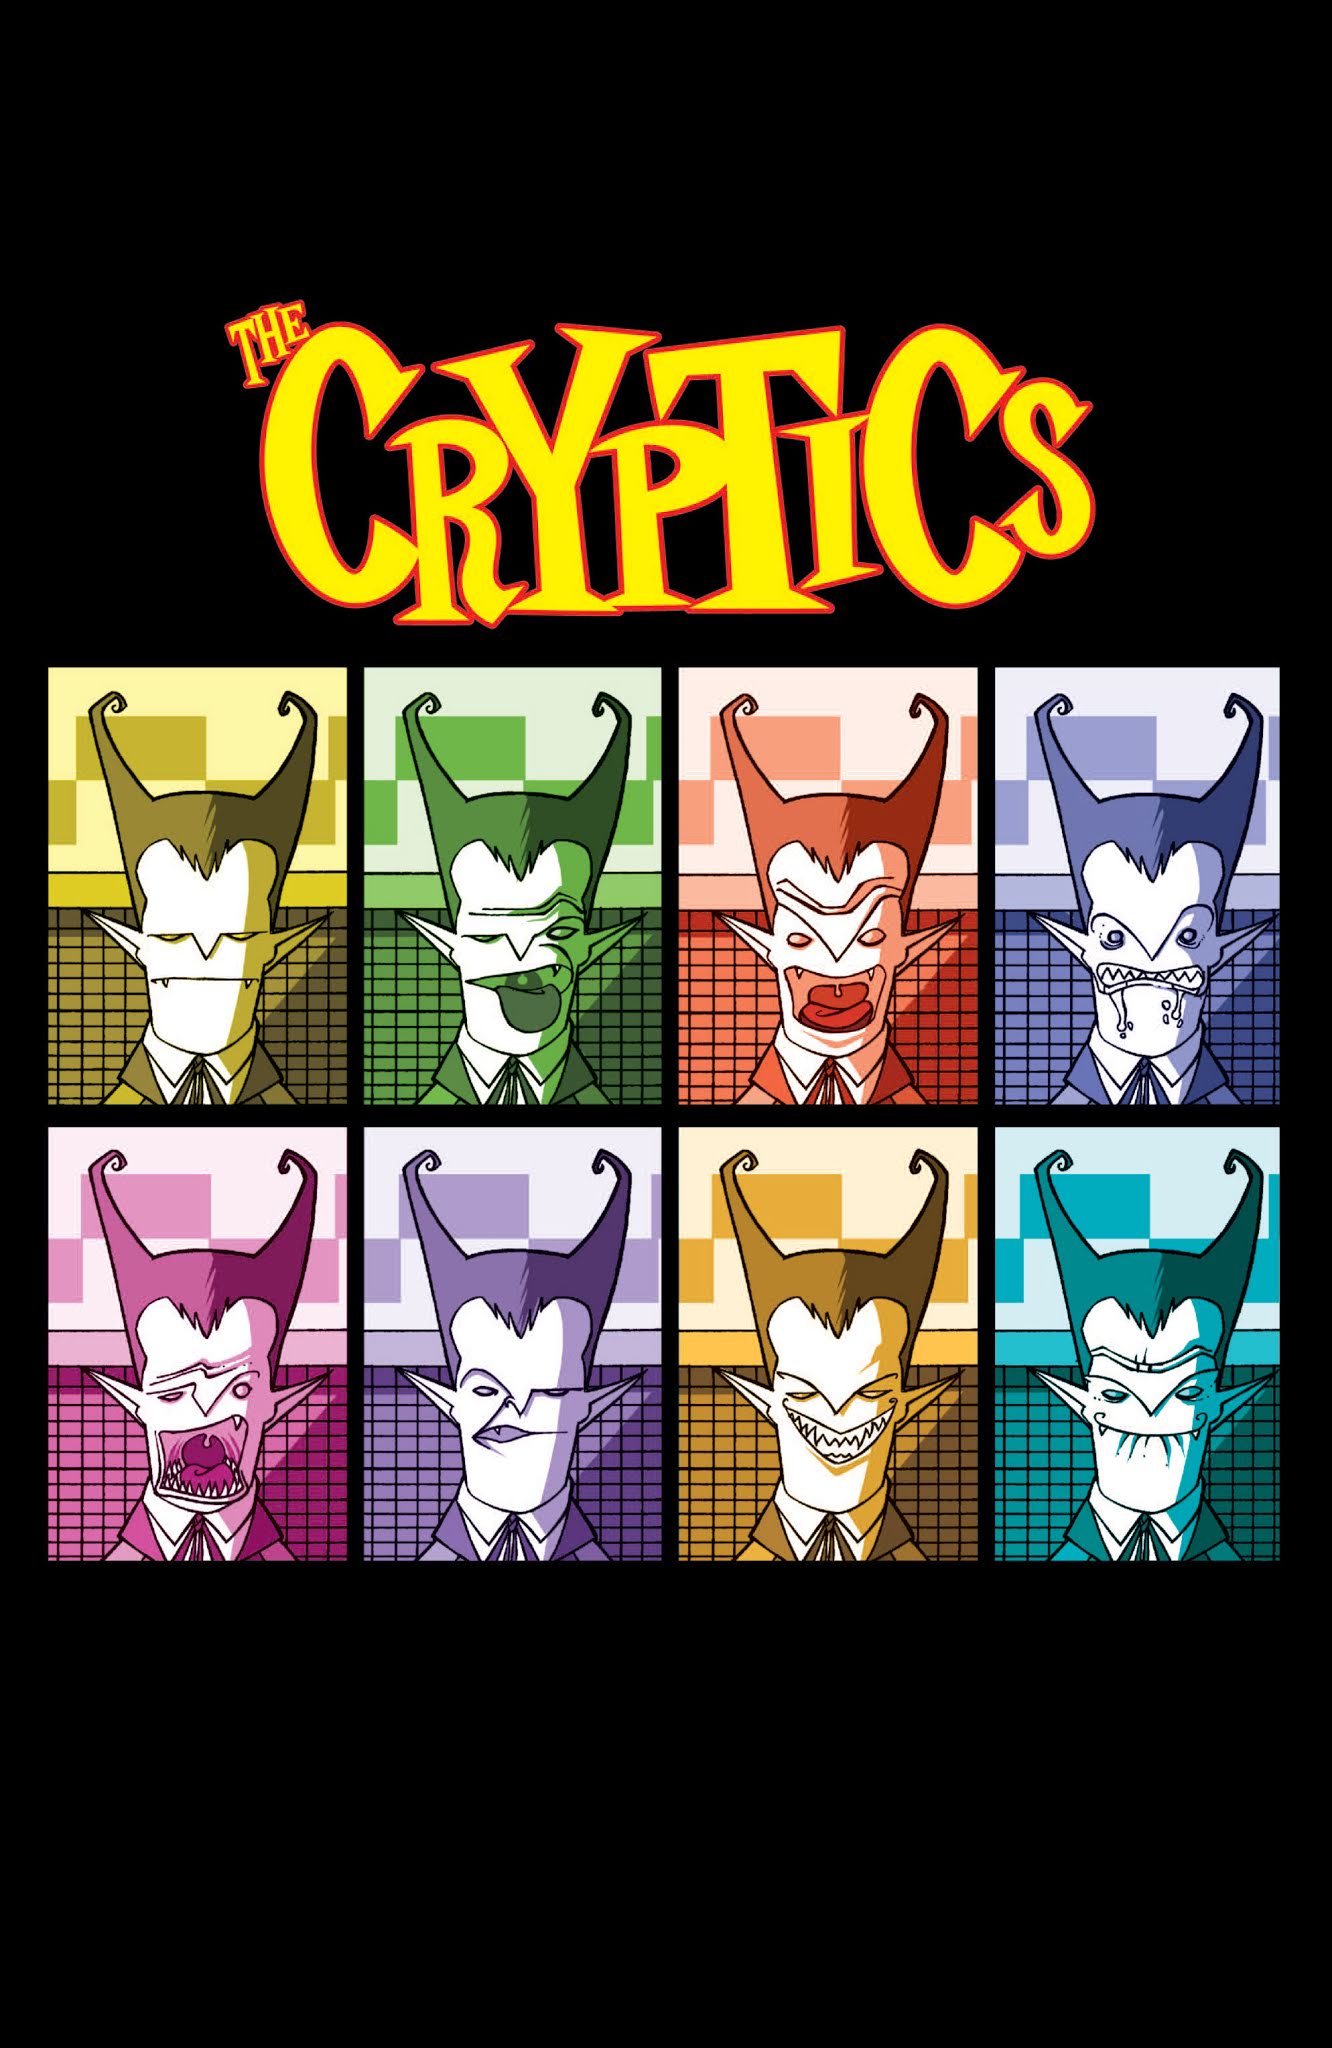 Read online The Cryptics comic -  Issue # TPB - 2